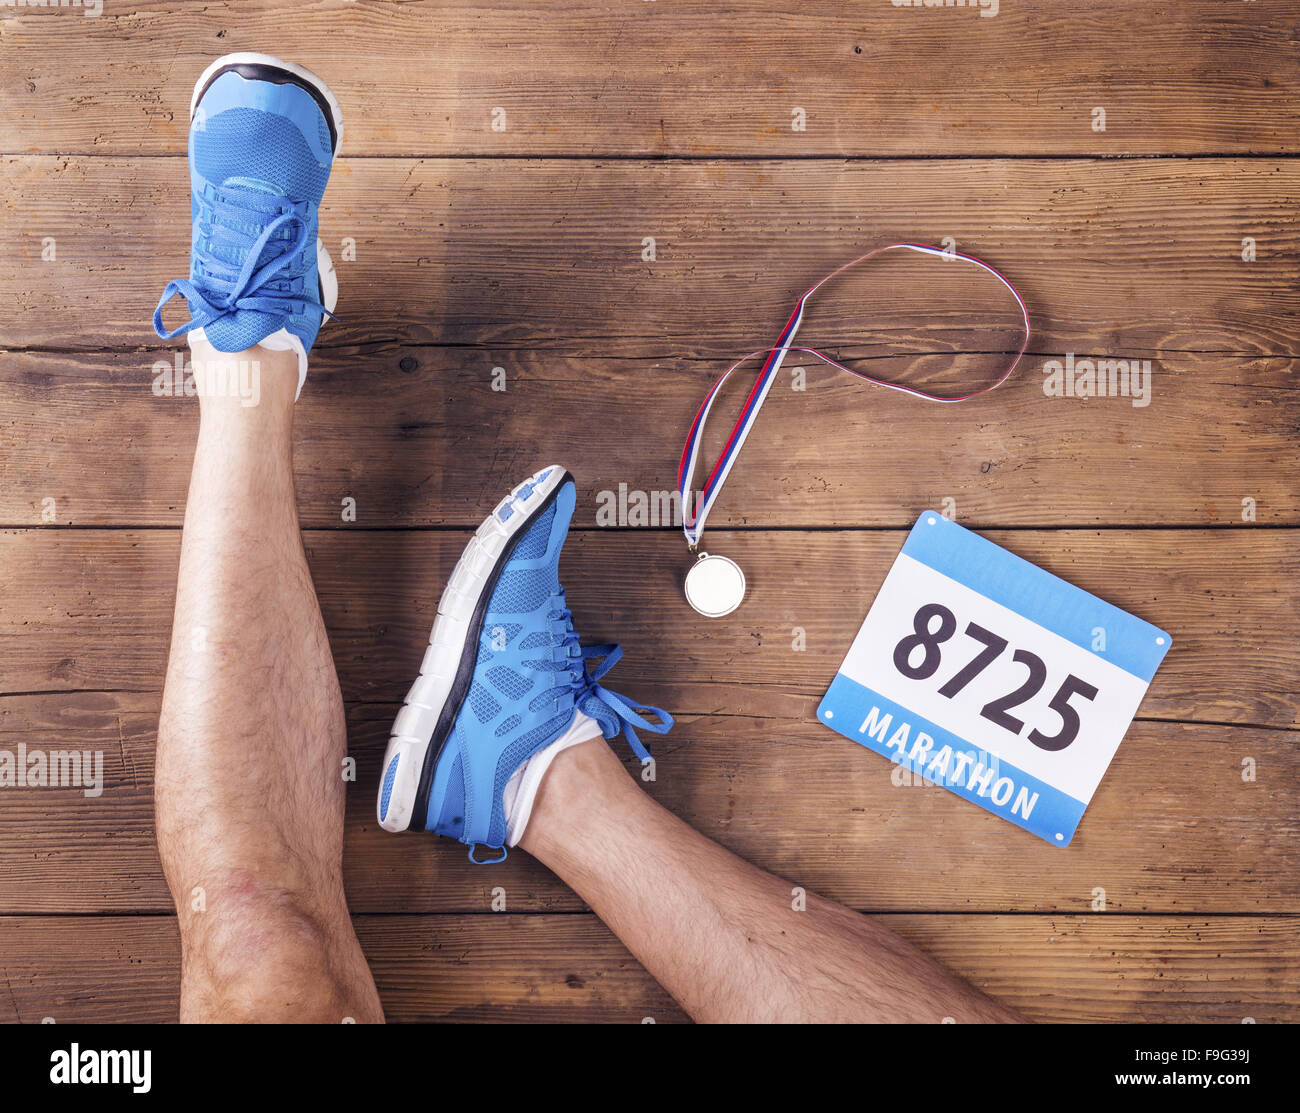 Legs of a runner, medal and race number on a wooden floor background Stock Photo